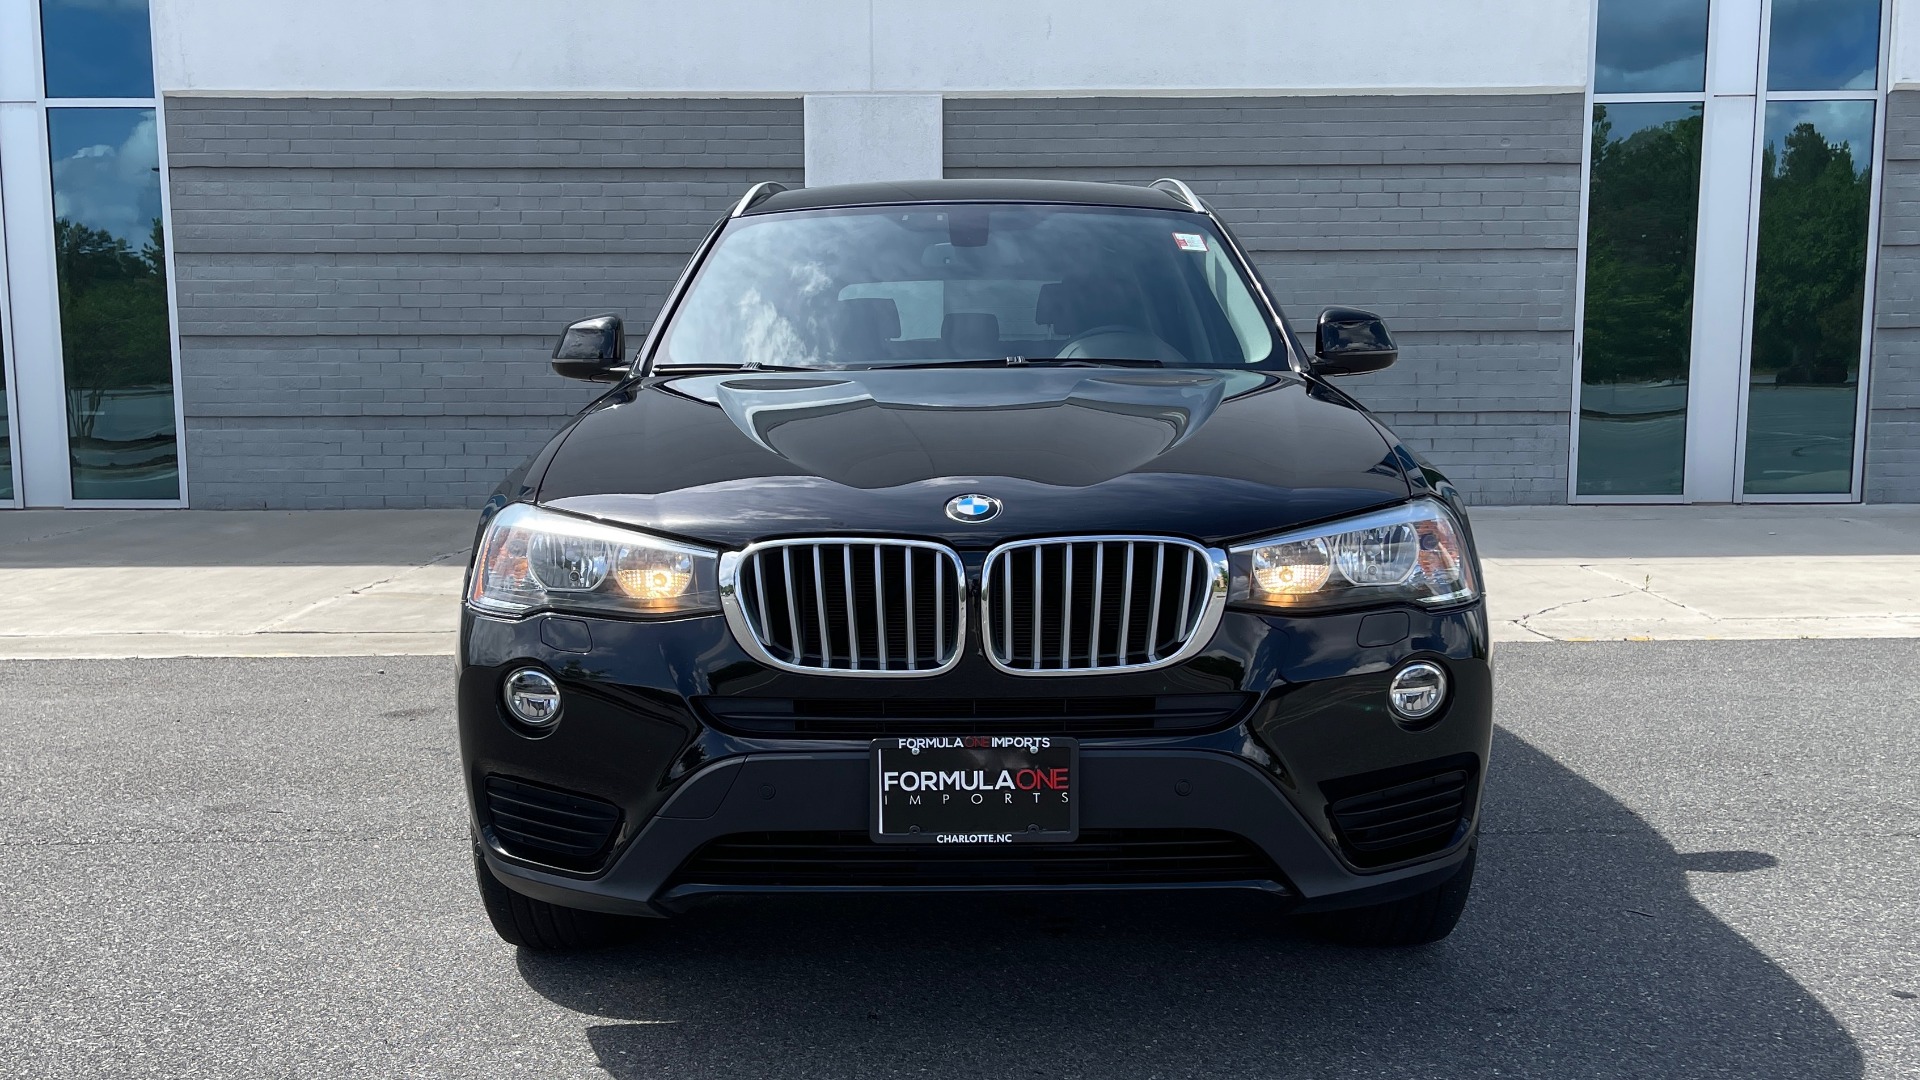 Used 2017 BMW X3 SDRIVE28I / DRVR ASST PKG / HTD STS / REARVIEW / 18IN WHEELS for sale Sold at Formula Imports in Charlotte NC 28227 12